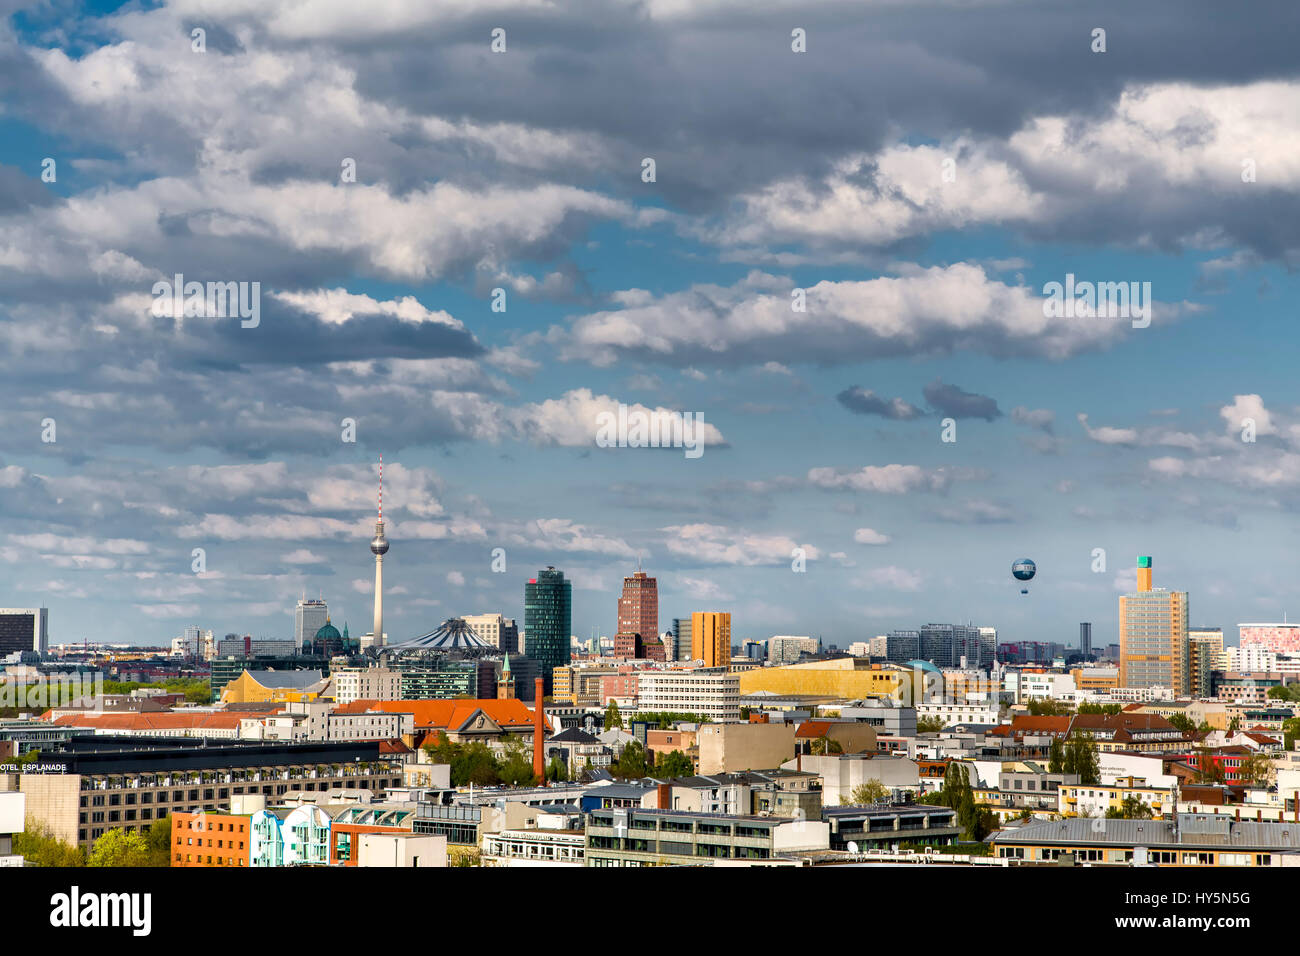 View from the City West eastbound to Potsdamer Platz, Dom and Alexanderplatz television tower, Berlin, Germany Stock Photo